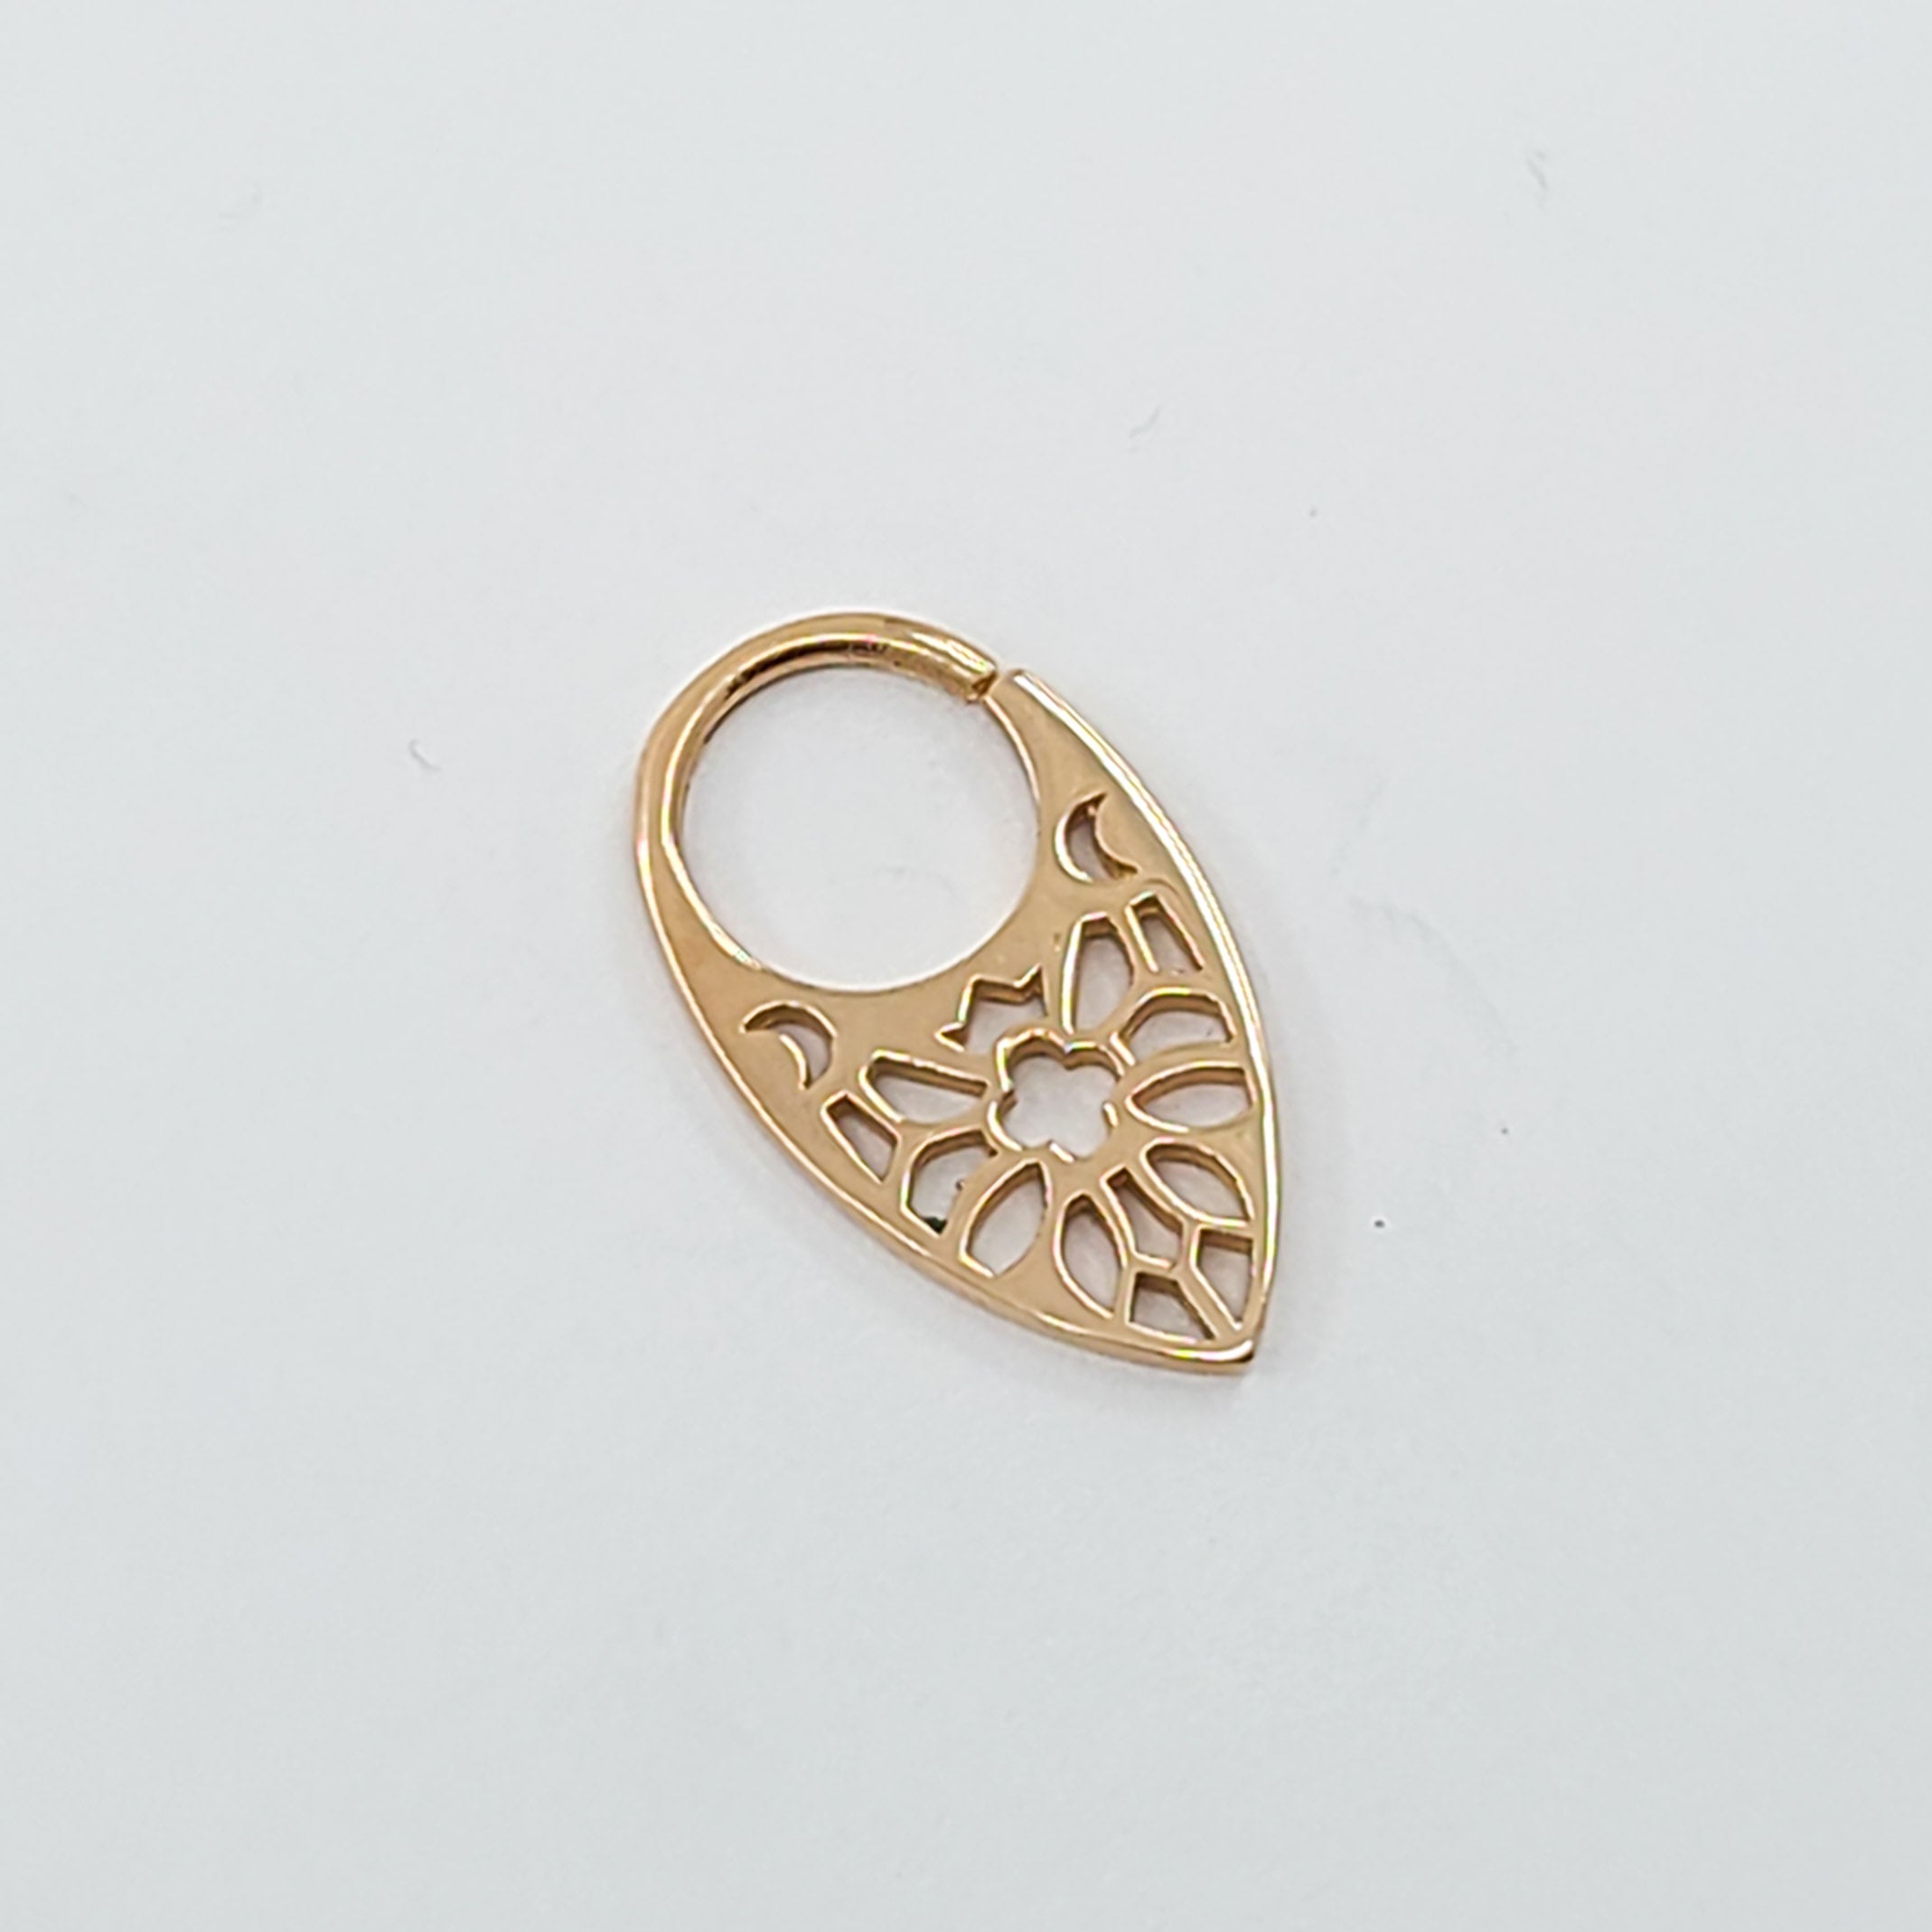 10K 14K Rose Gold Moon Phase Septum, Stained Glass